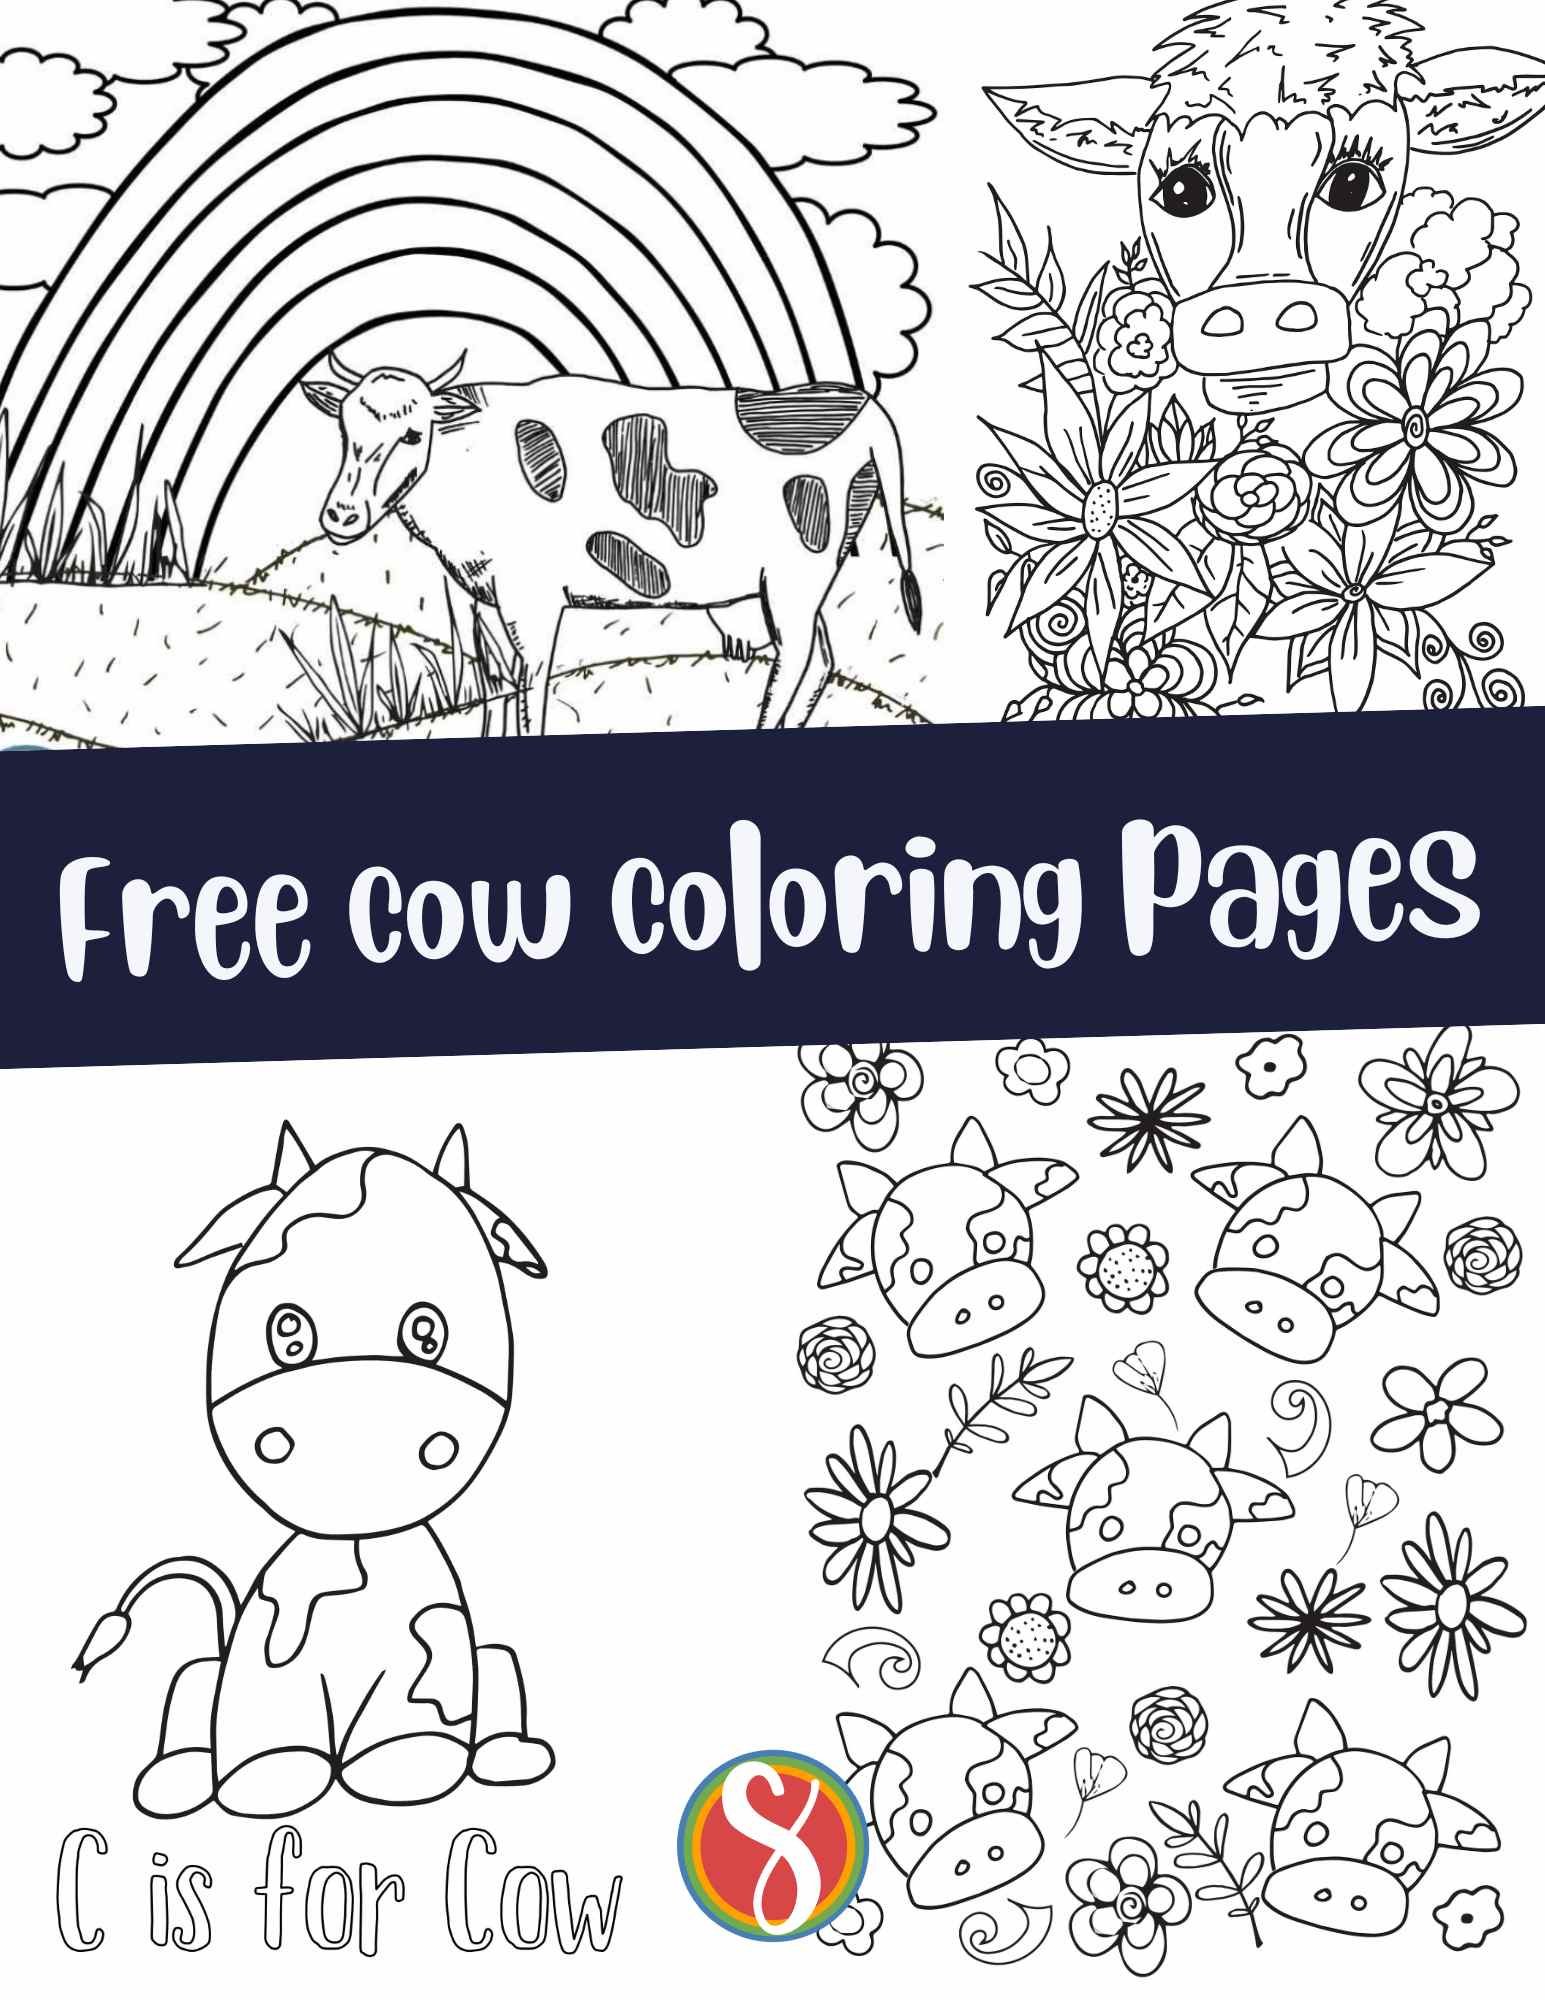 a collage of cow coloring pages with the text "free cow coloring pages"